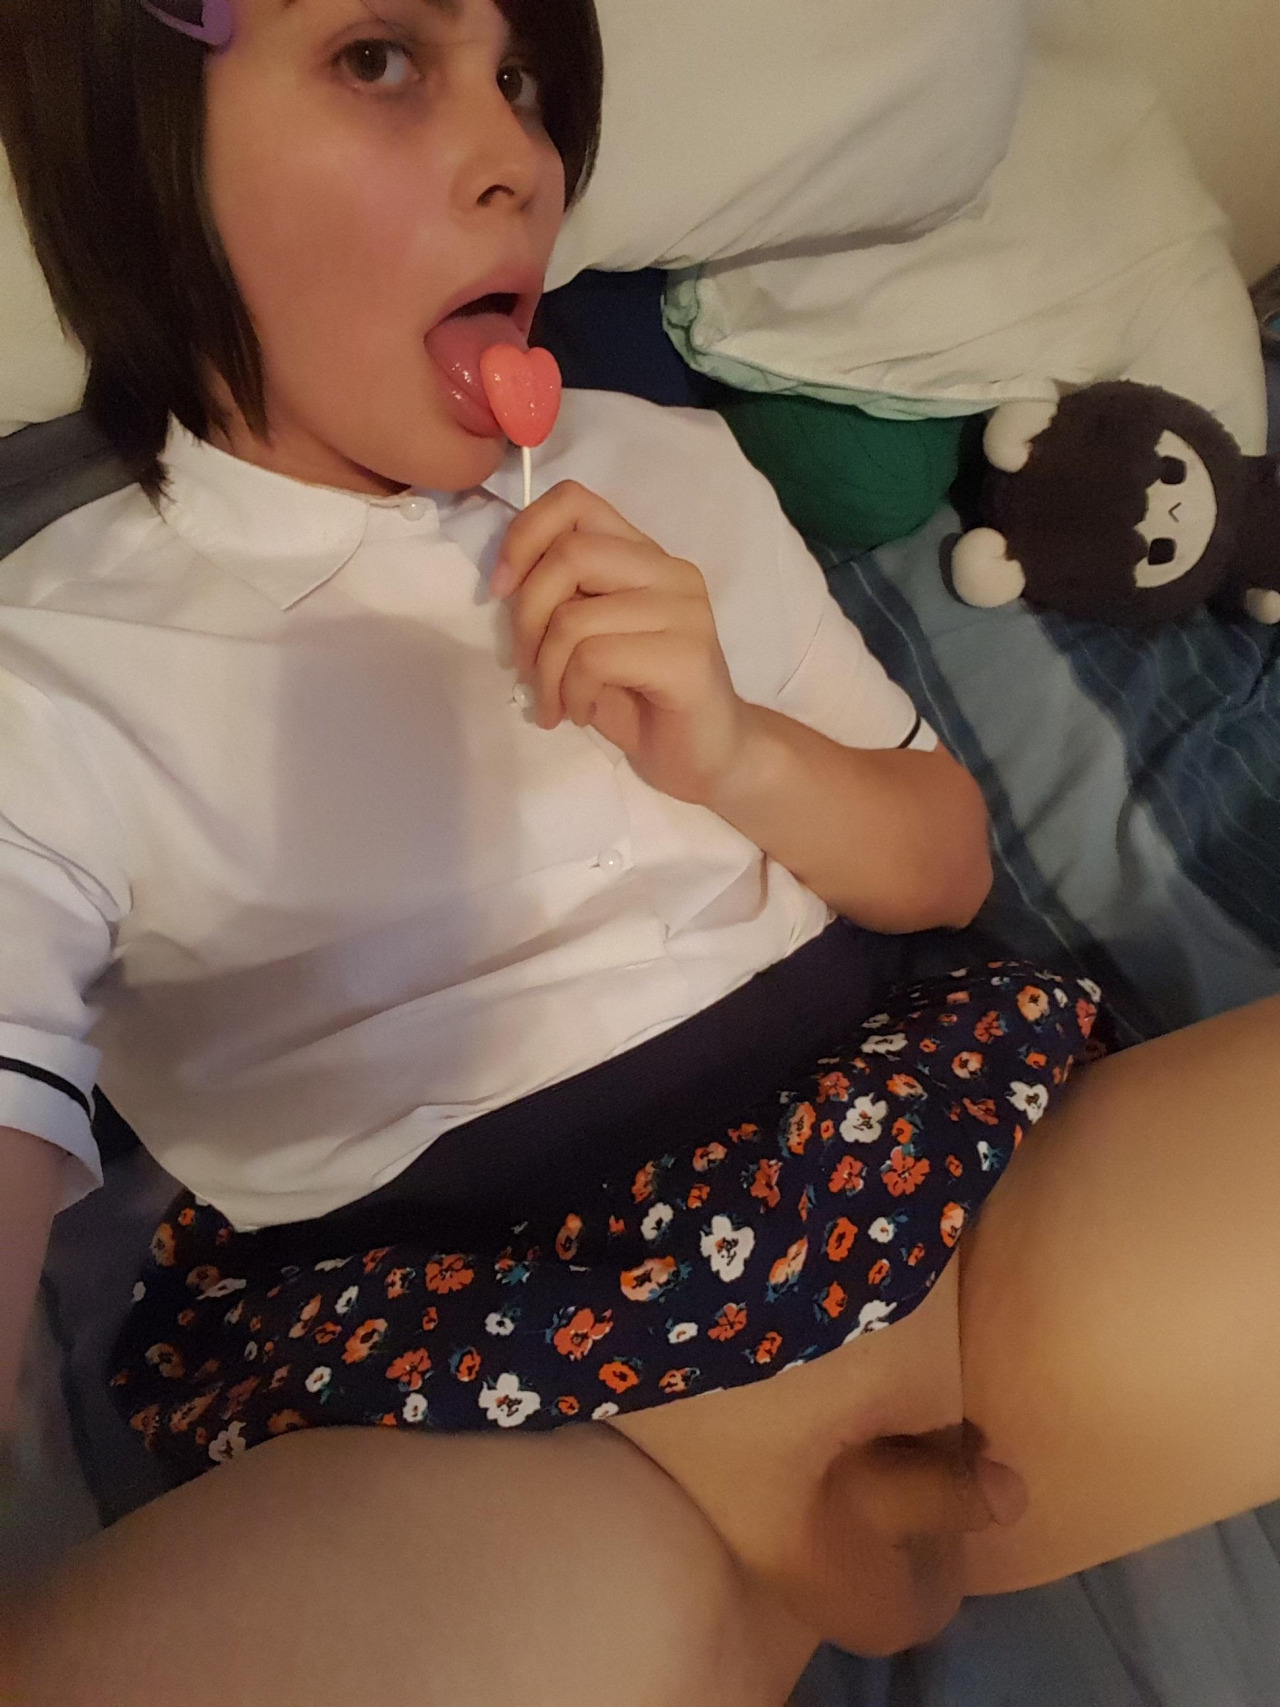 wifebucket hipster wife in uniform likes it kinky Amateur, Brunette, Cd, Cocksiwanttofuck, Cocksiwanttosuck, Crosdress, Crossdresser, Crossdressing, Femboy, Homemade, Lingerie, Pigtails, Sissy